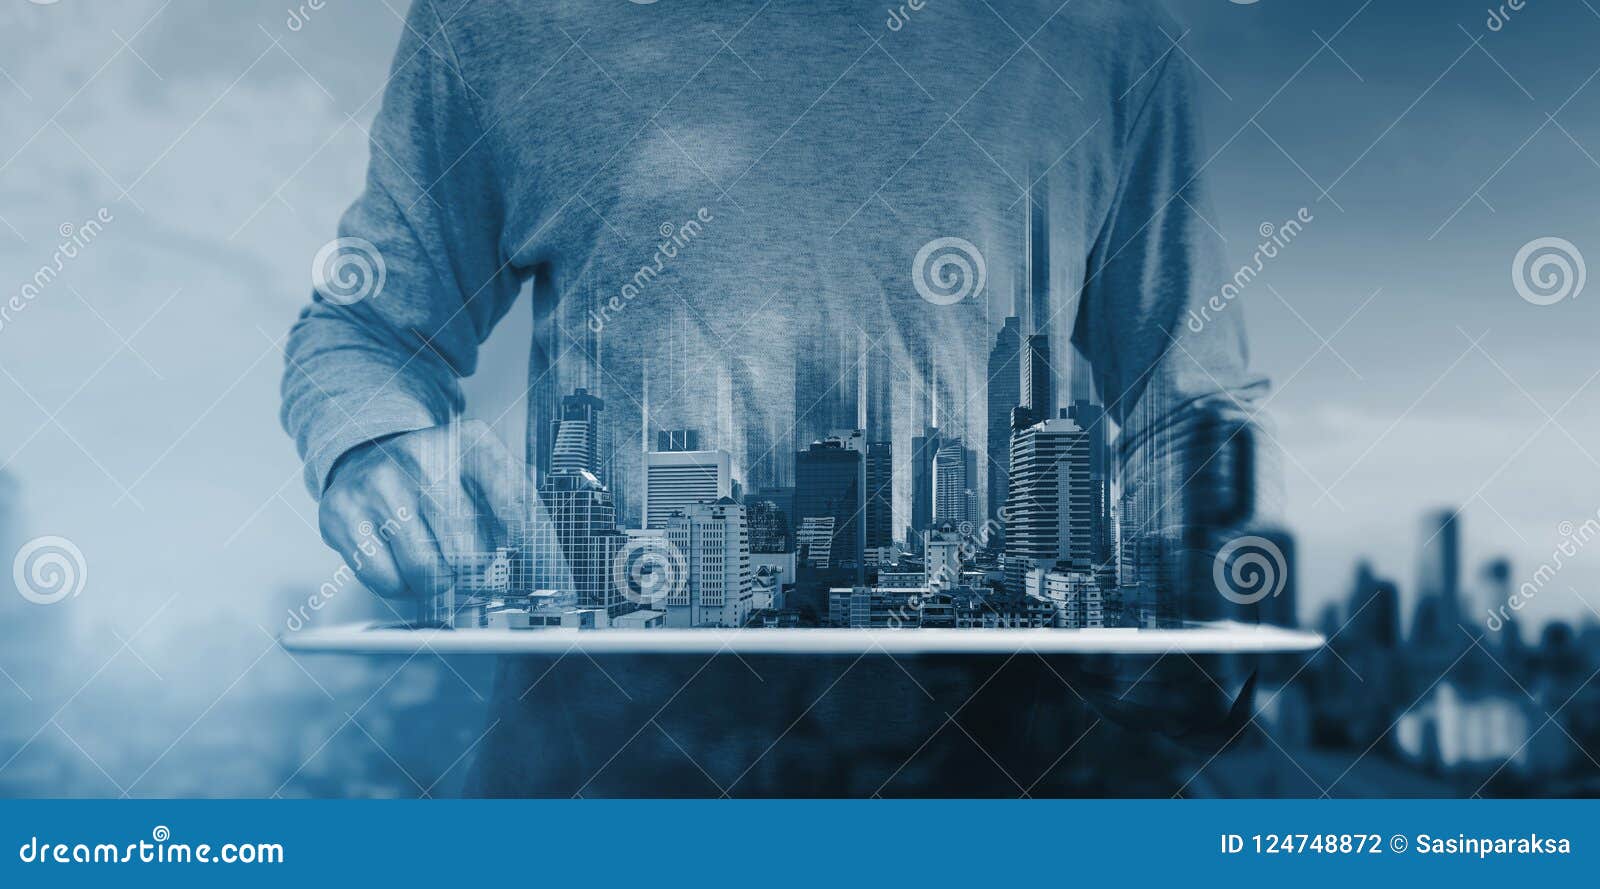 double exposure, a man using digital tablet, and modern buildings hologram. real estate business and building technology concept